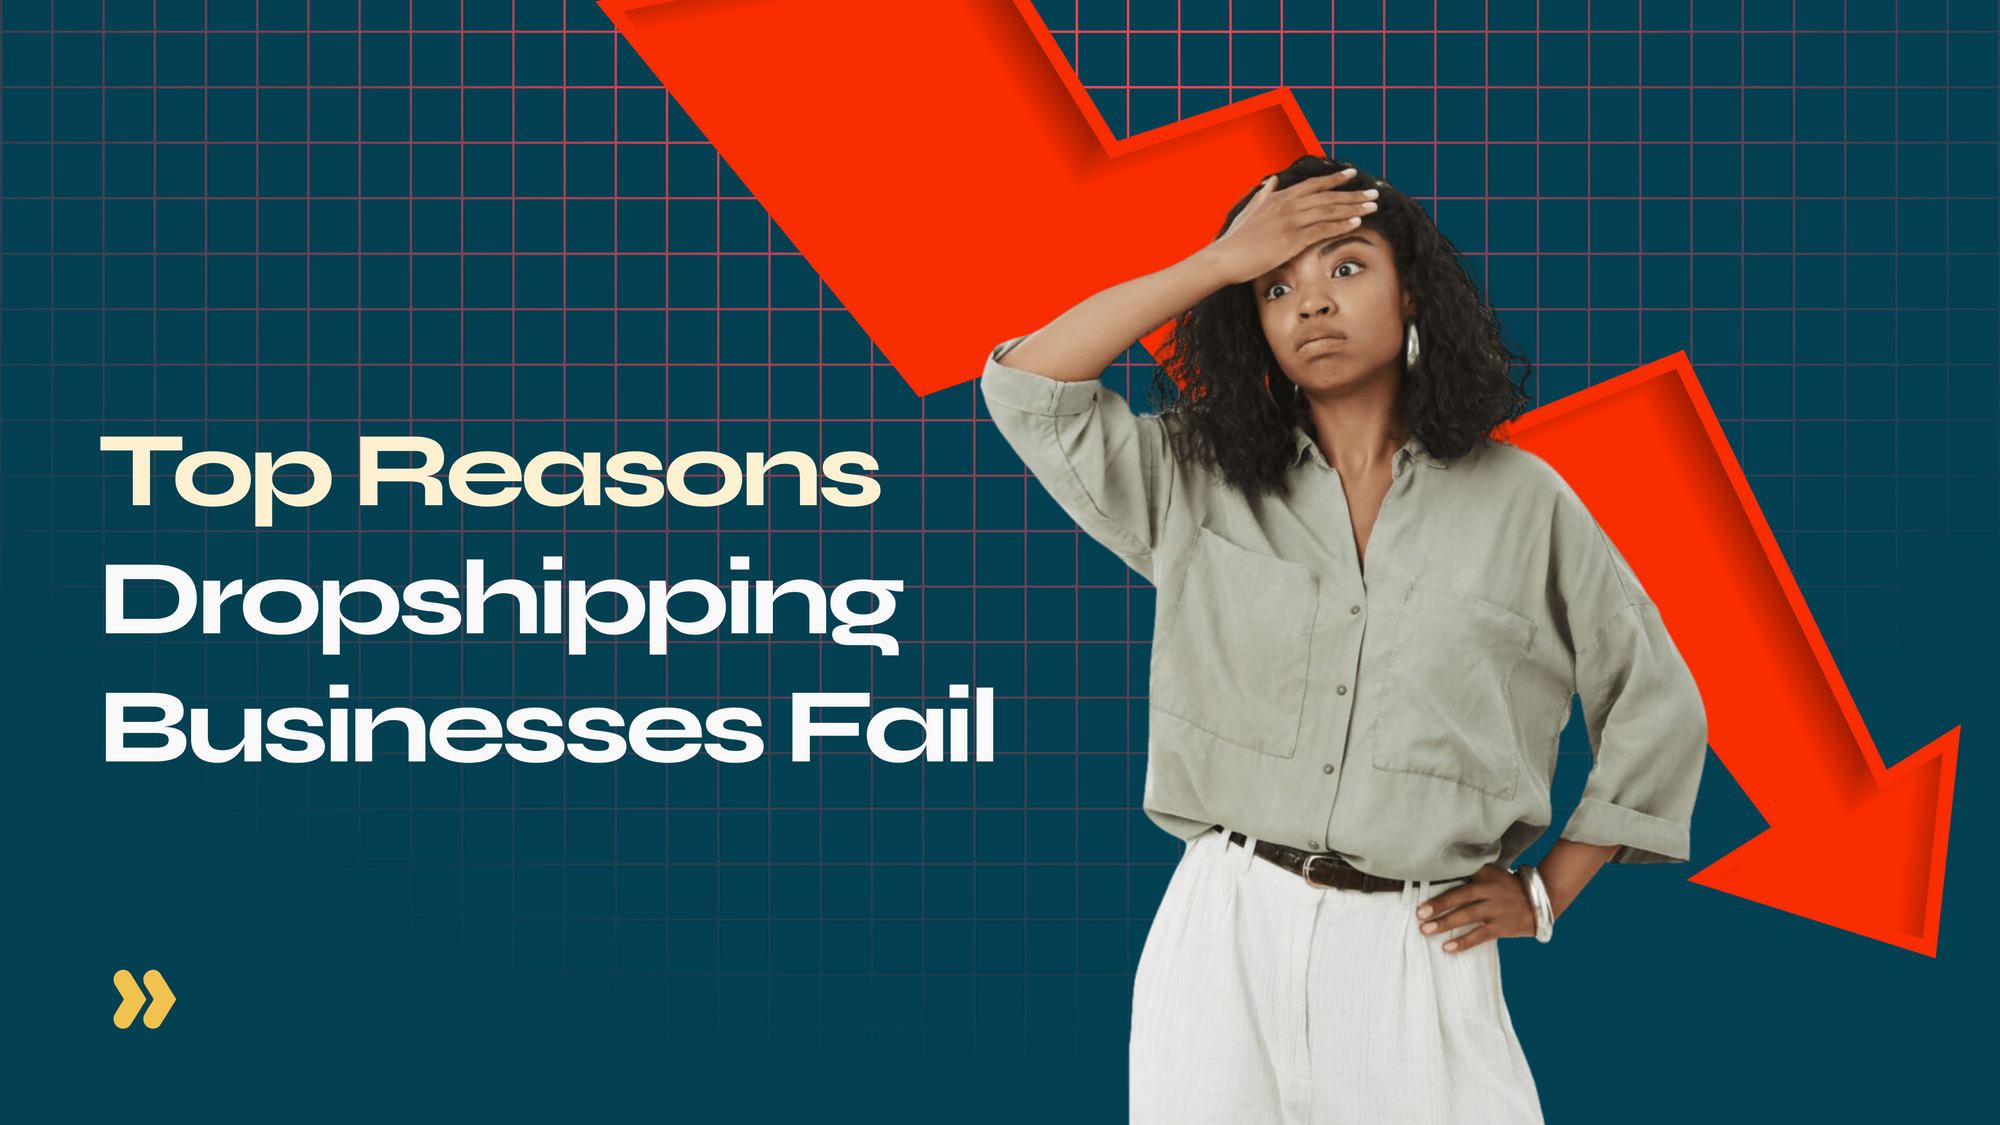 10 Reasons Why Your Dropshipping Business Will Fail